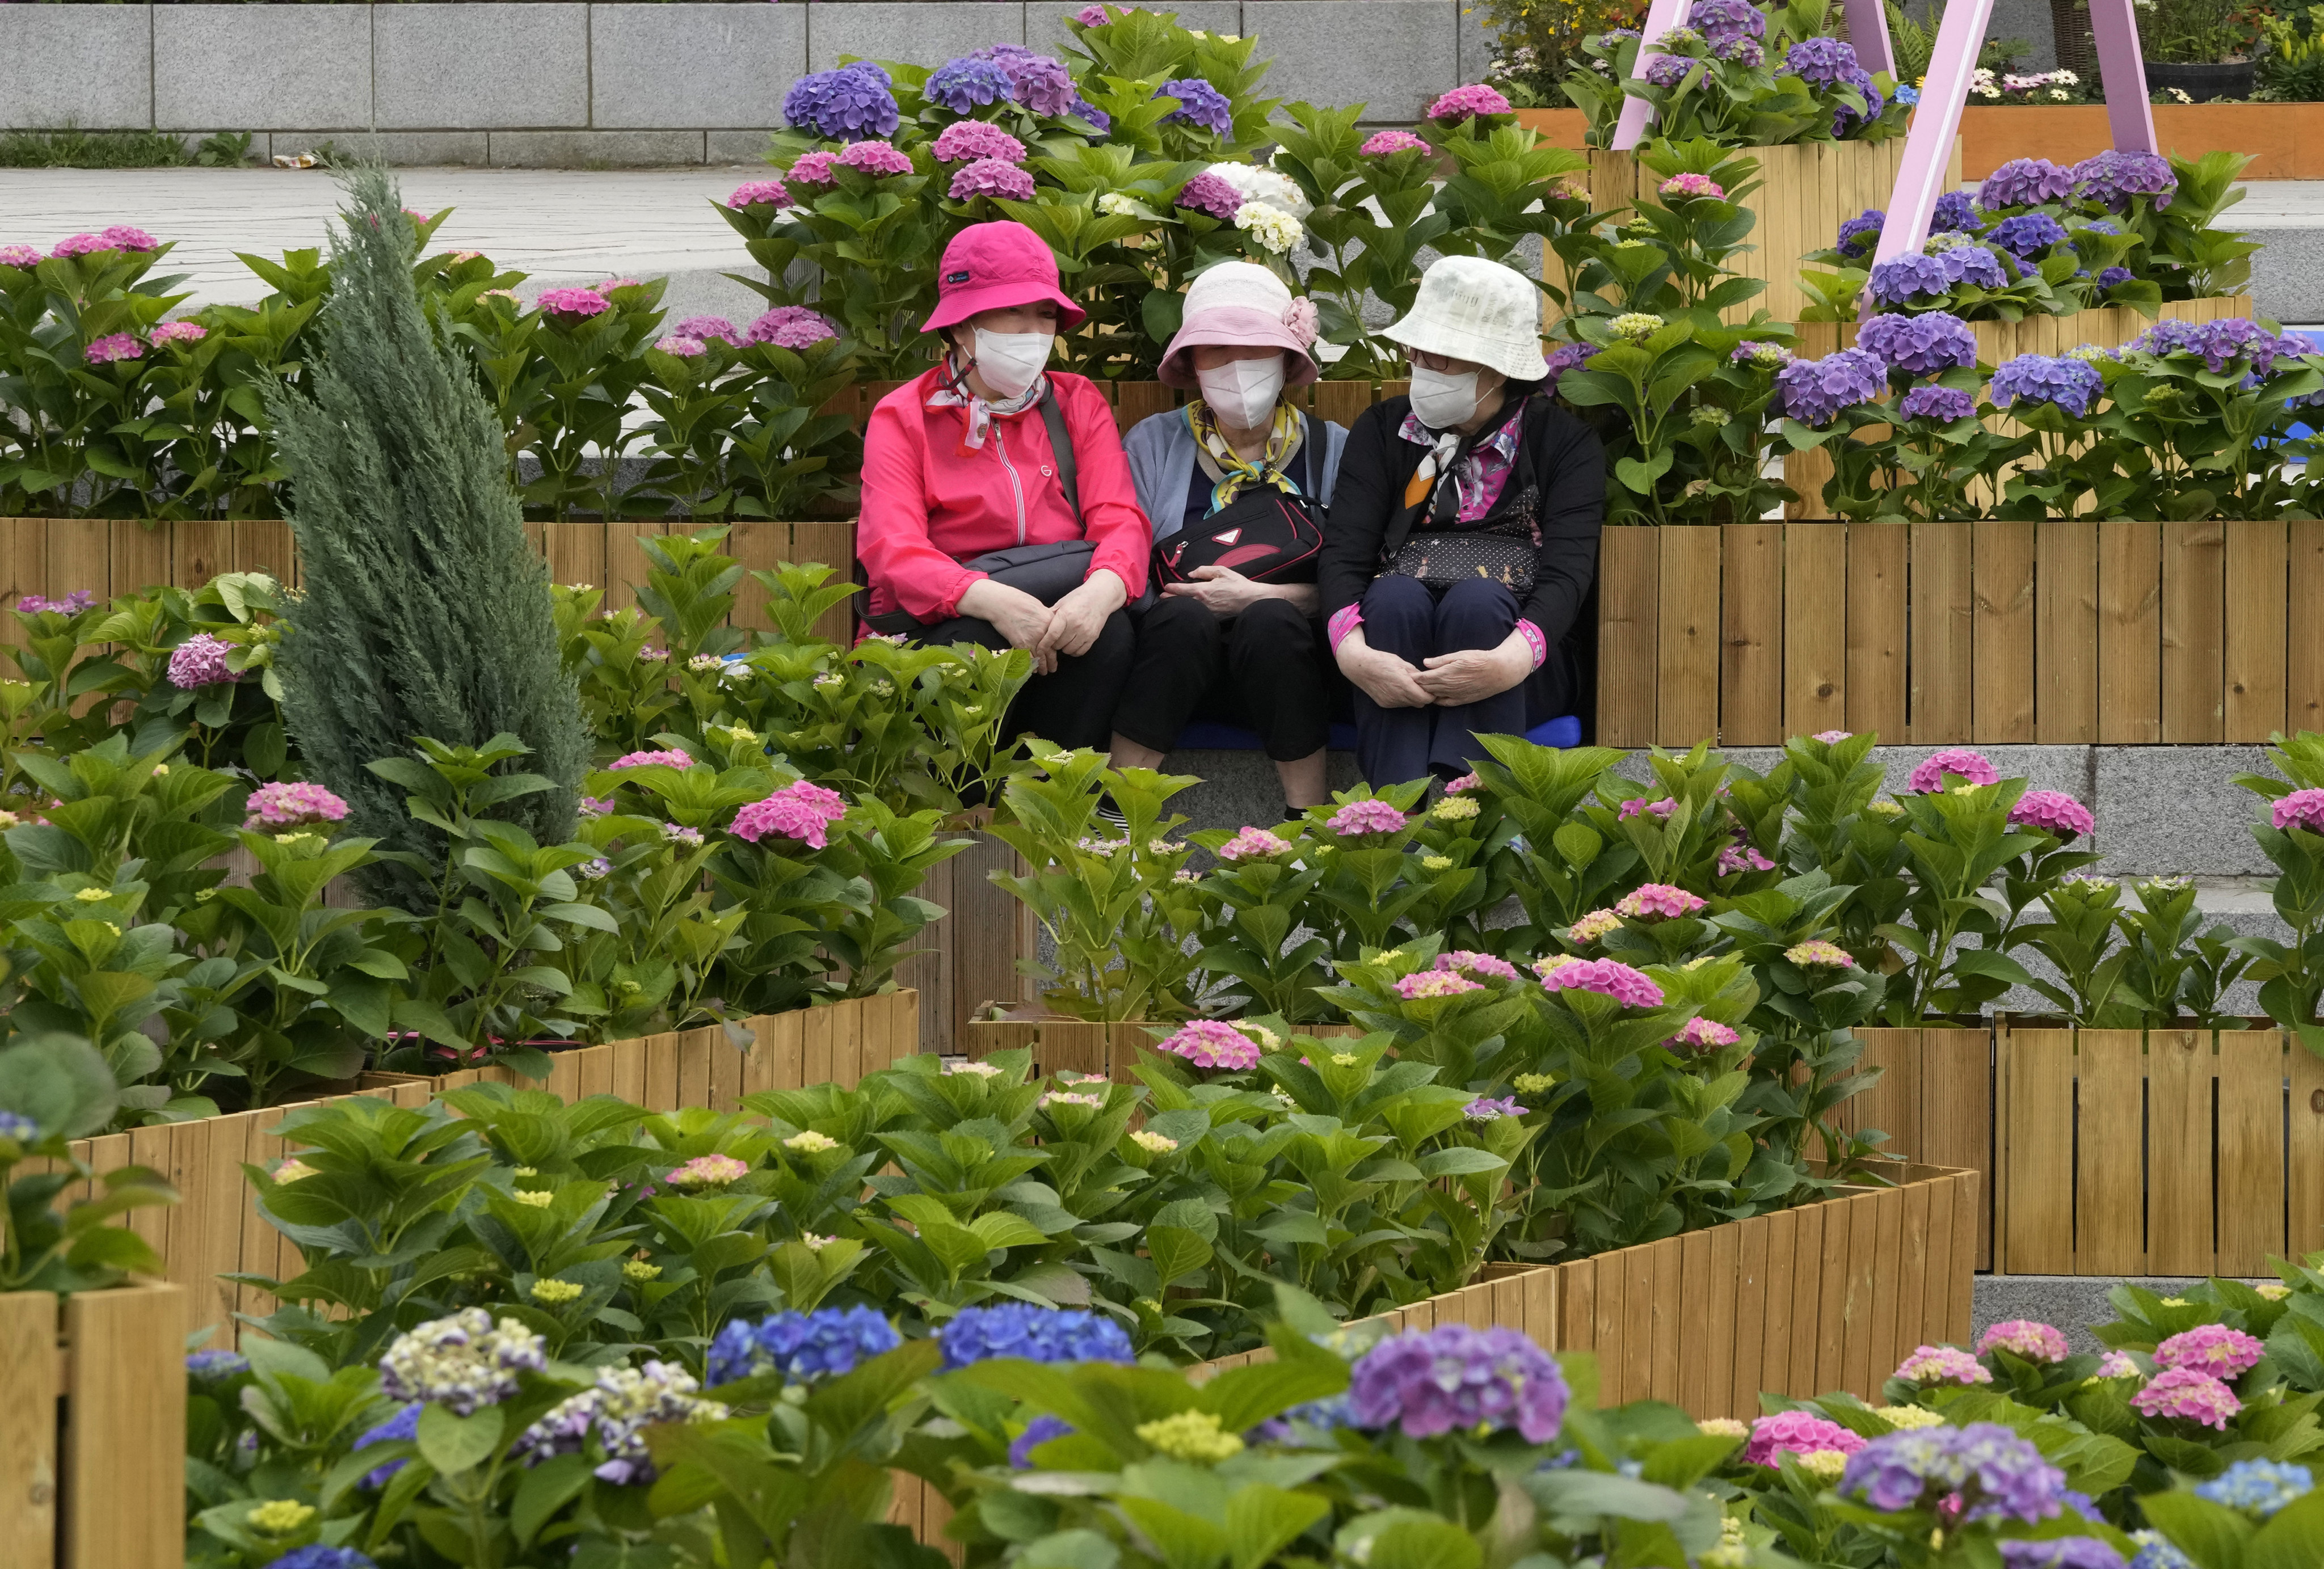 Women wearing face masks to help curb the spread of the coronavirus sit in a flower garden at a park in Goyang, South Korea, on April 28. Photo: AP 